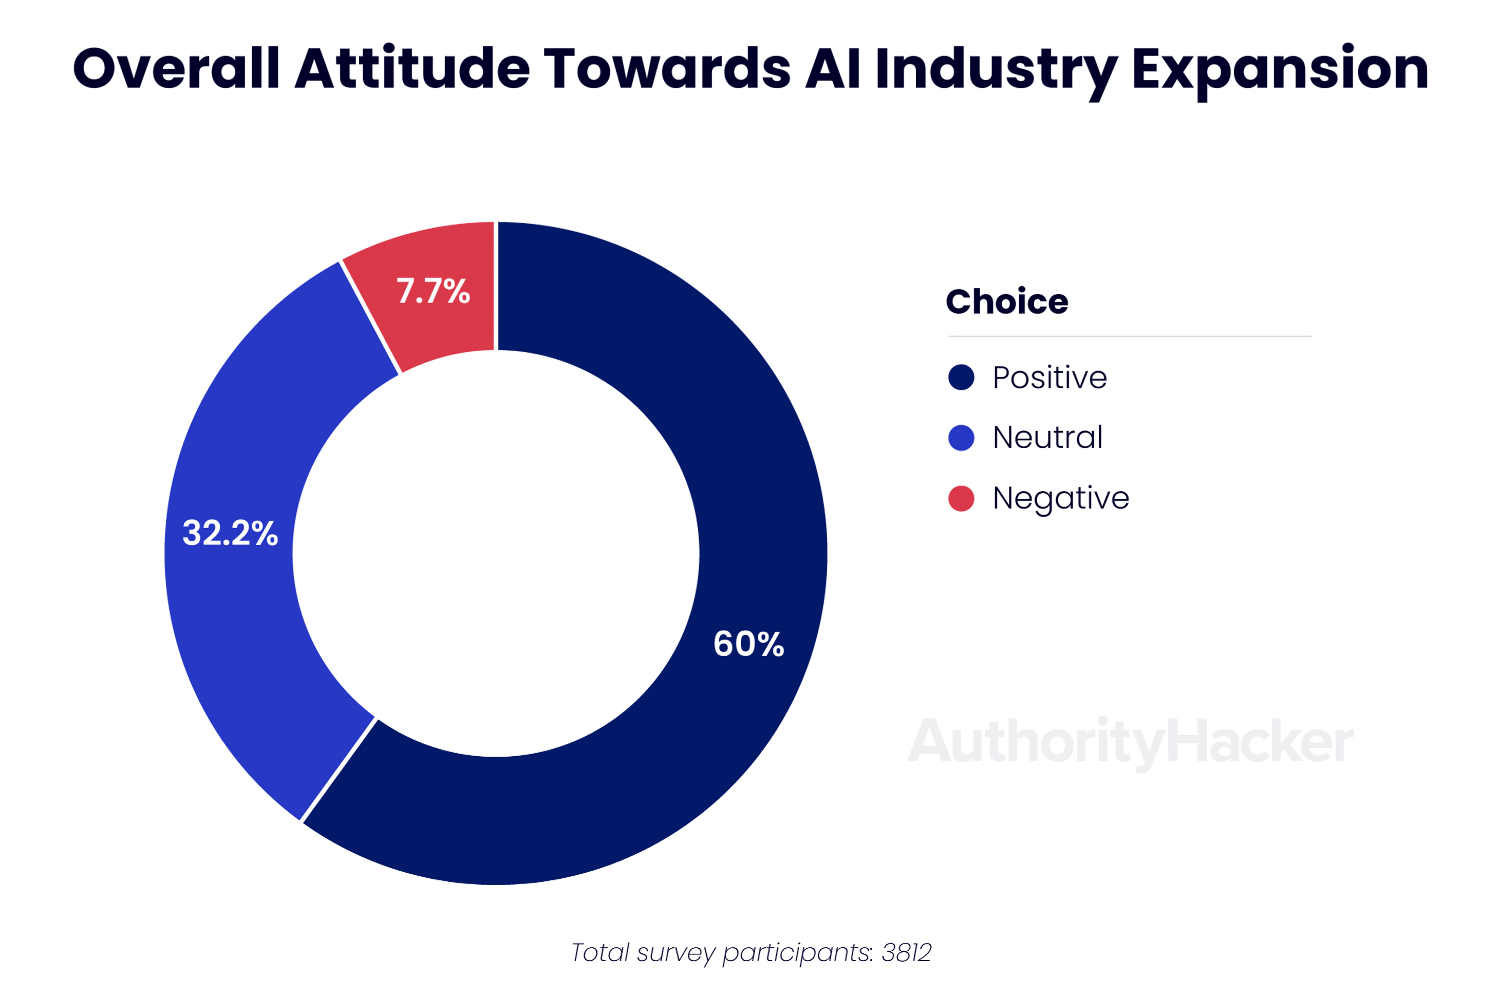 ai industry expansion attitude